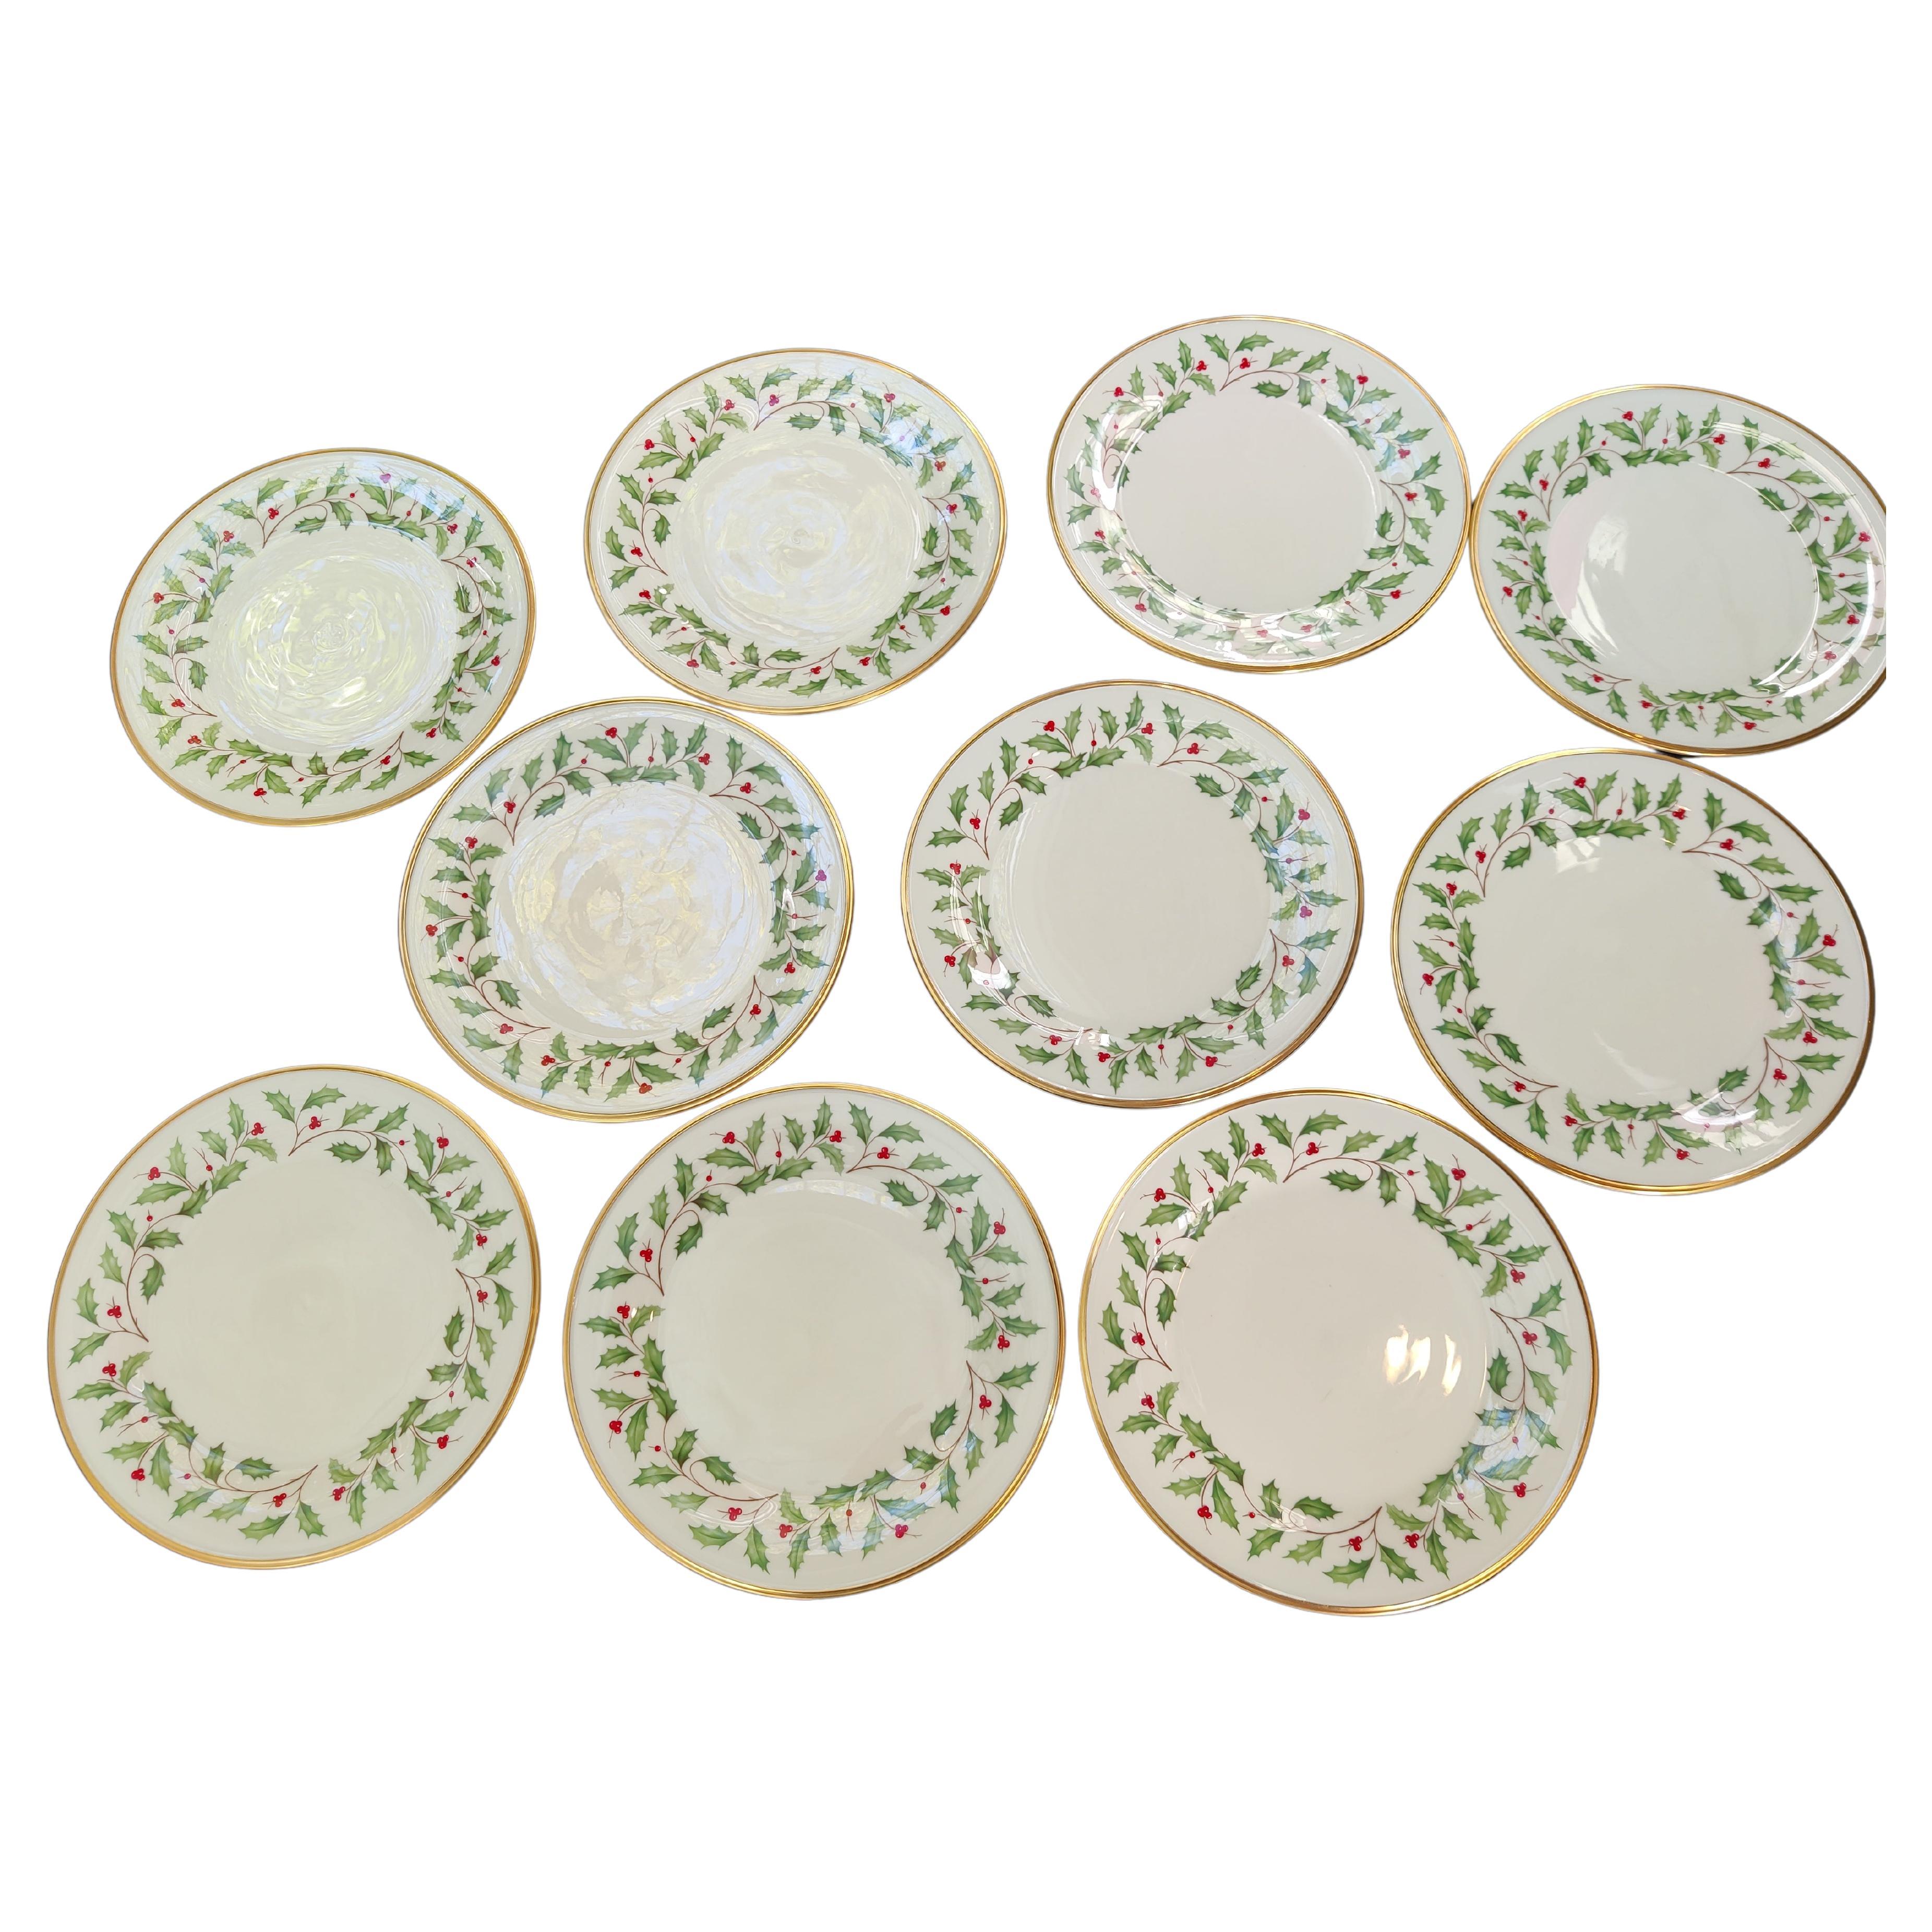 Set of 10 Lenox Christmas Plates.
Ivory Bone China.
Holly and Red Berry Design with 24K Gold Rim.
